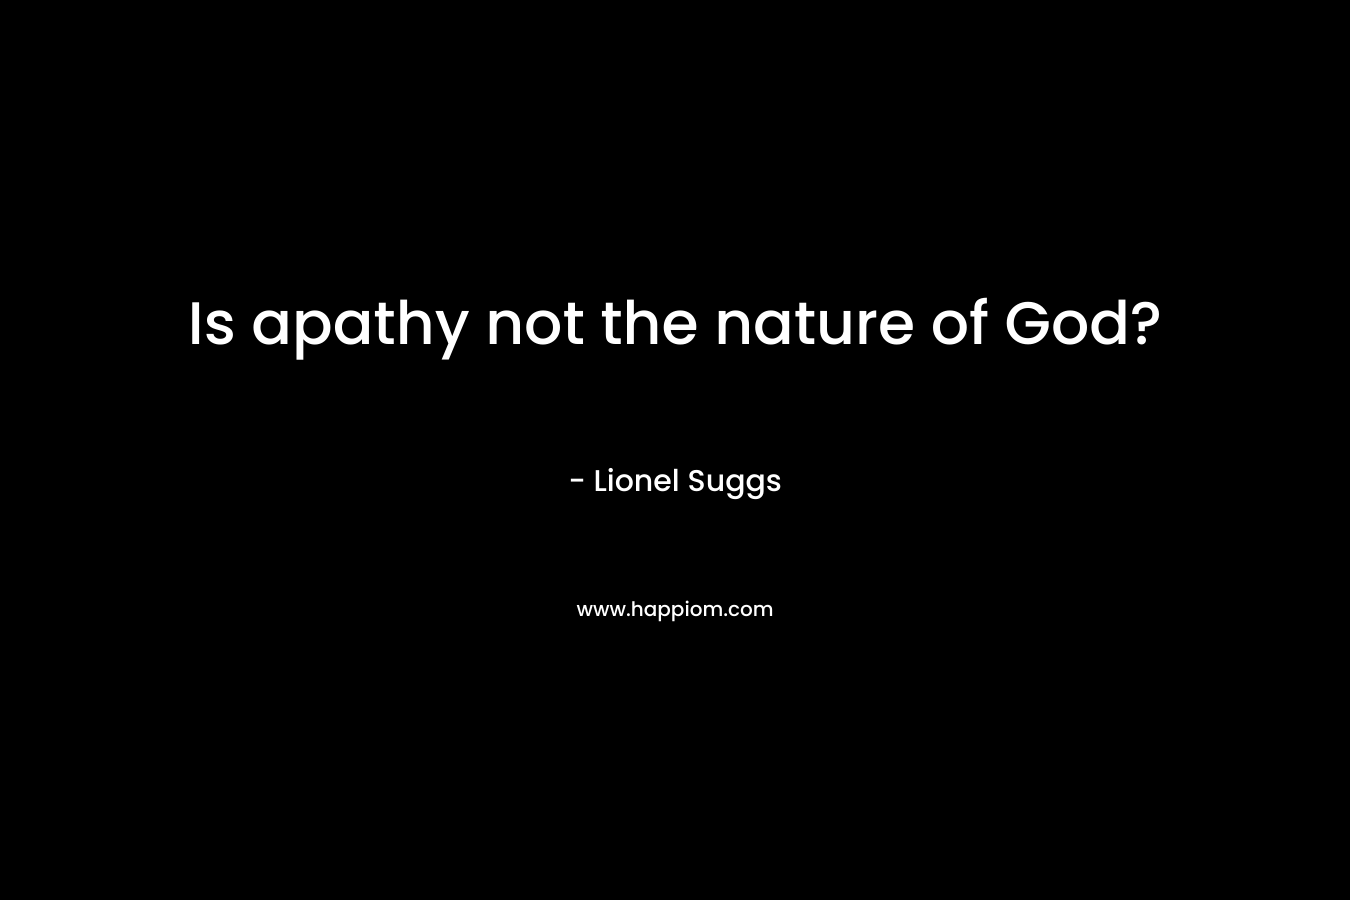 Is apathy not the nature of God?